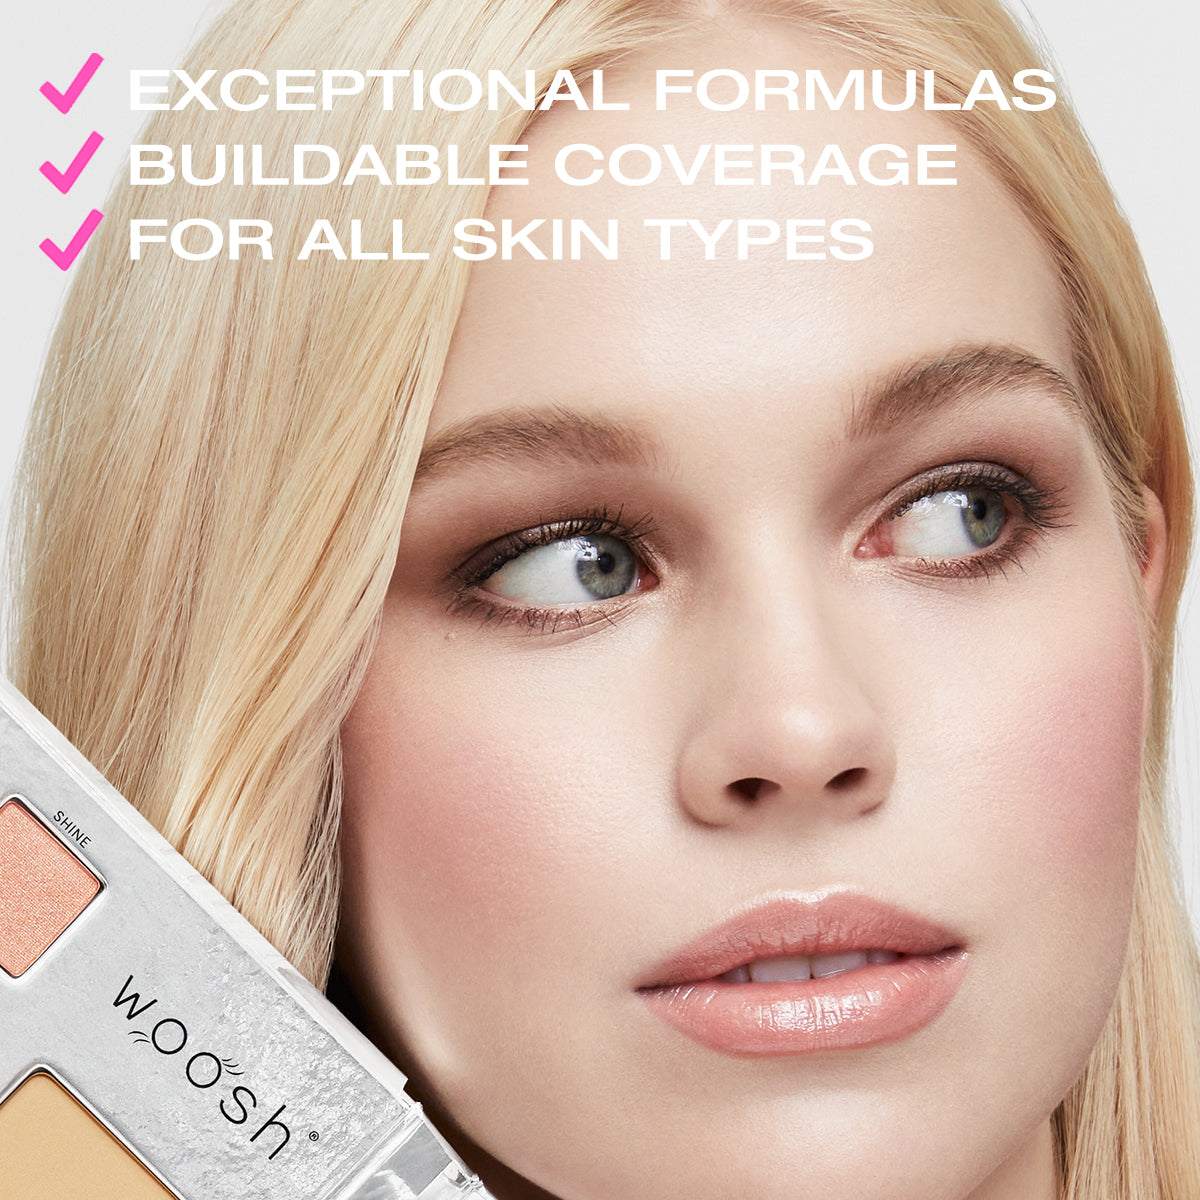 Text describing the fold out face palette as having exceptional formulas, buildable coverages, and is for all skin types